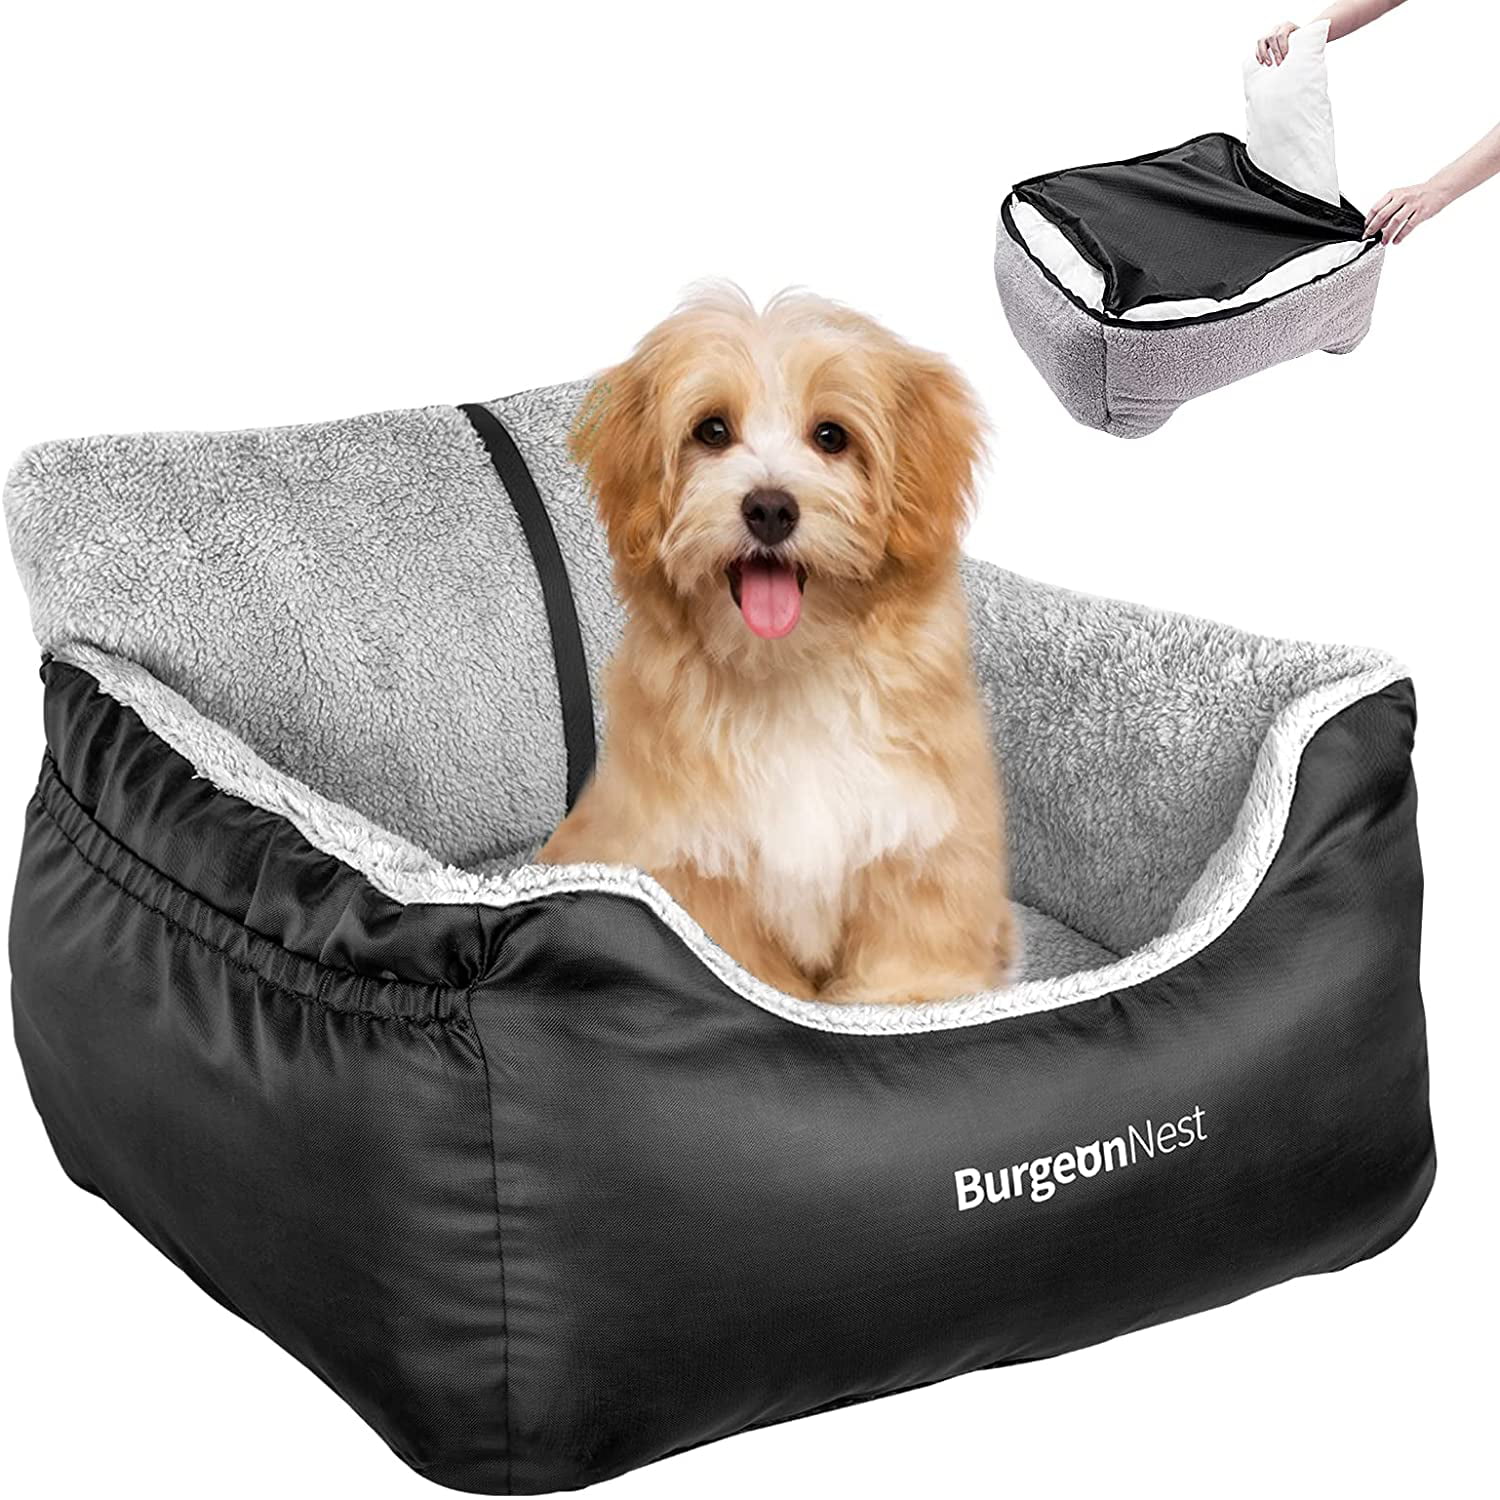 Dog Car Seat,Puppy Booster Seat Cat Pet Travel Car Carrier Bed with Storage Pocket and Clip-on Safety Leash Removable Washable Cover for Small Dogs and Cats. 